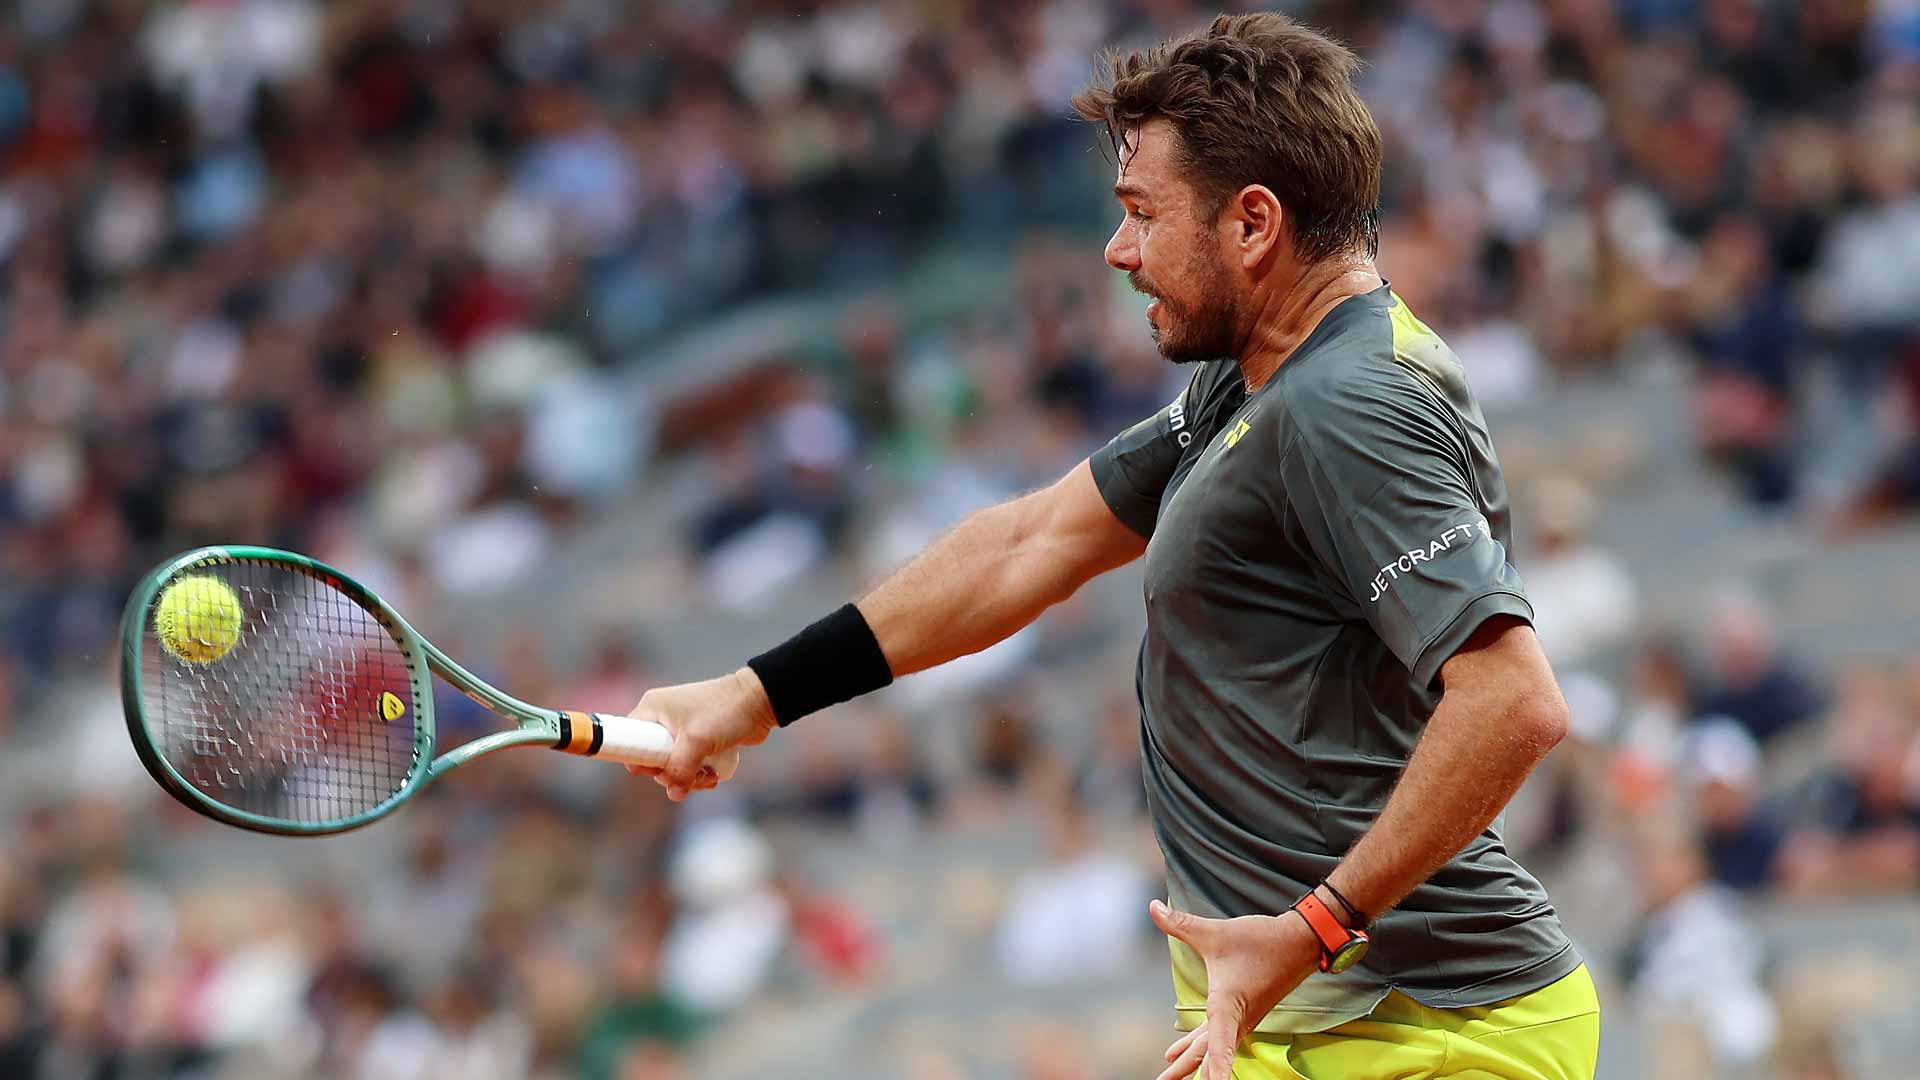 Wawrinka overpowers Murray: 'My best match of the year'